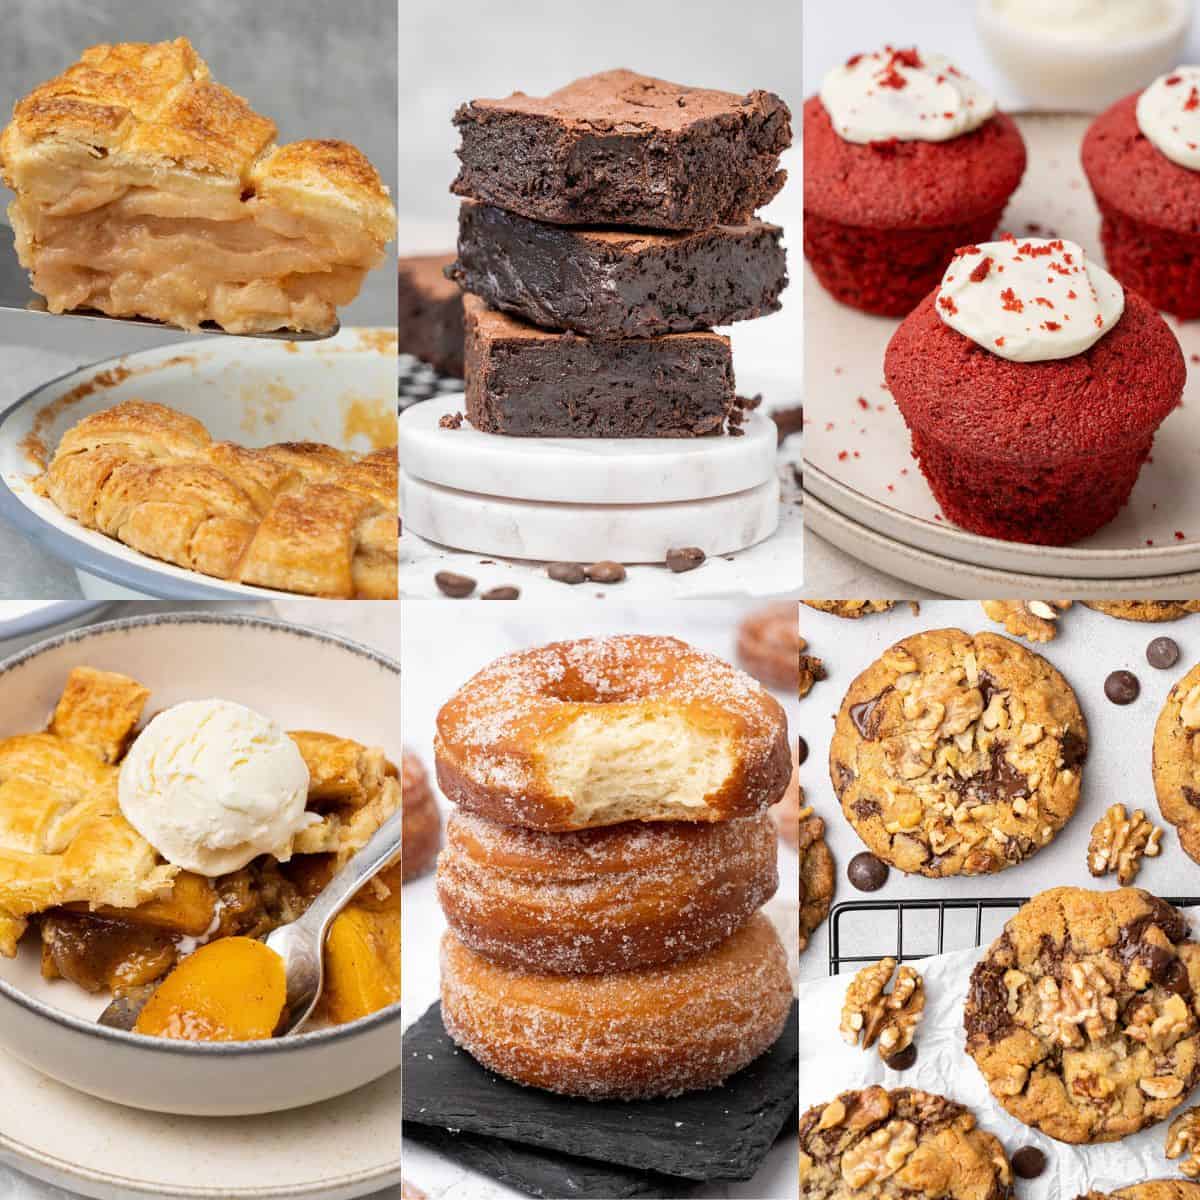 <p>The best <strong><a href="https://www.spatuladesserts.com/american-desserts/">classic American desserts</a></strong> to make at home! You might be familiar with some of these traditional American desserts, but I'll bet there are a few you've never heard of.</p><p><strong>Go to the recipes: <a href="https://www.spatuladesserts.com/american-desserts/">Classic American Desserts</a></strong></p>